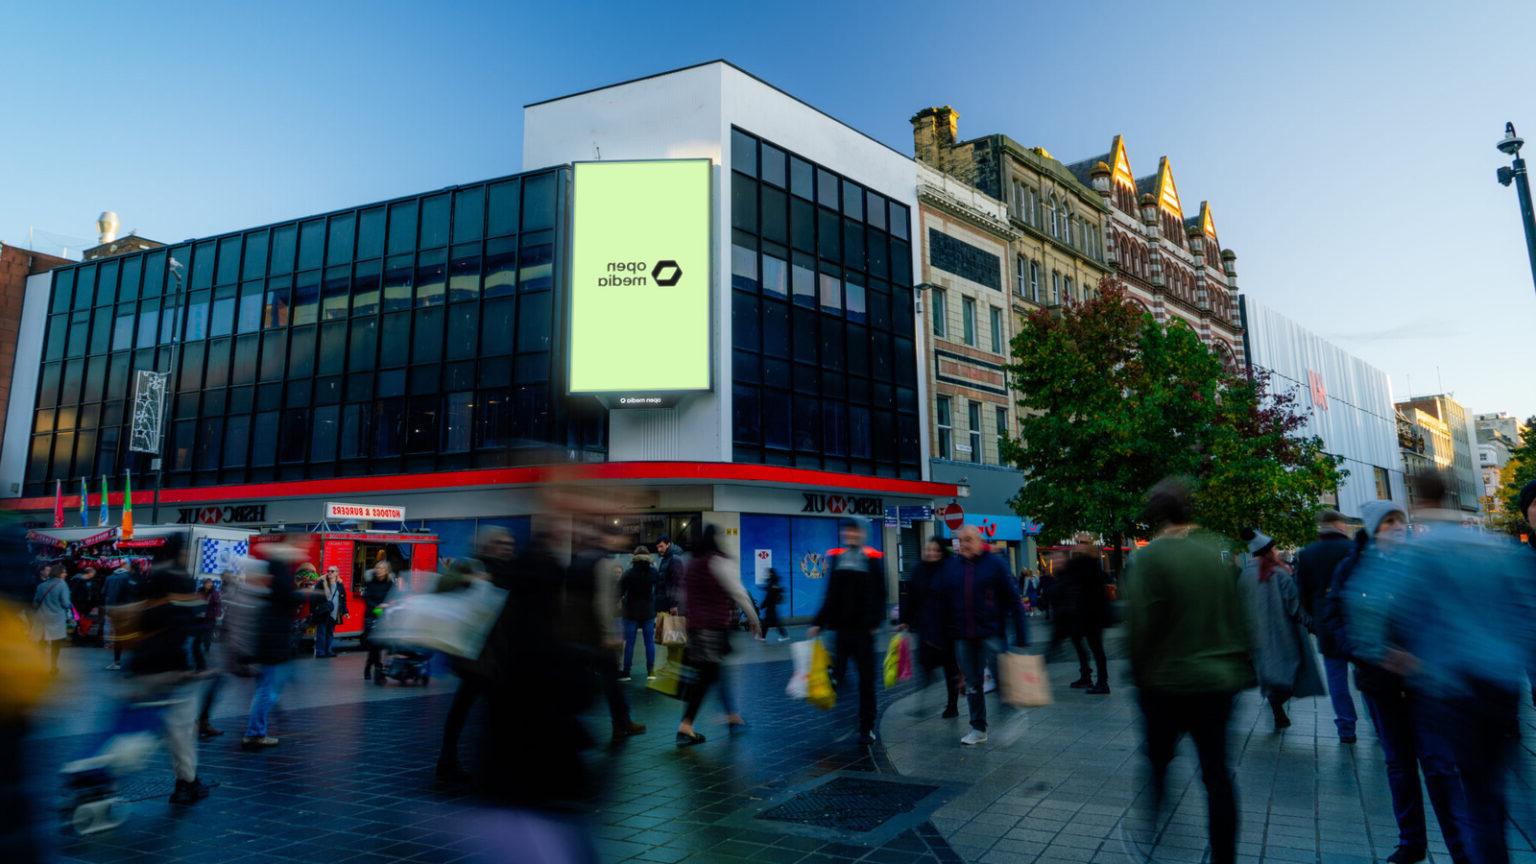 Open Media OOH screen in Liverpool One featuring new branding